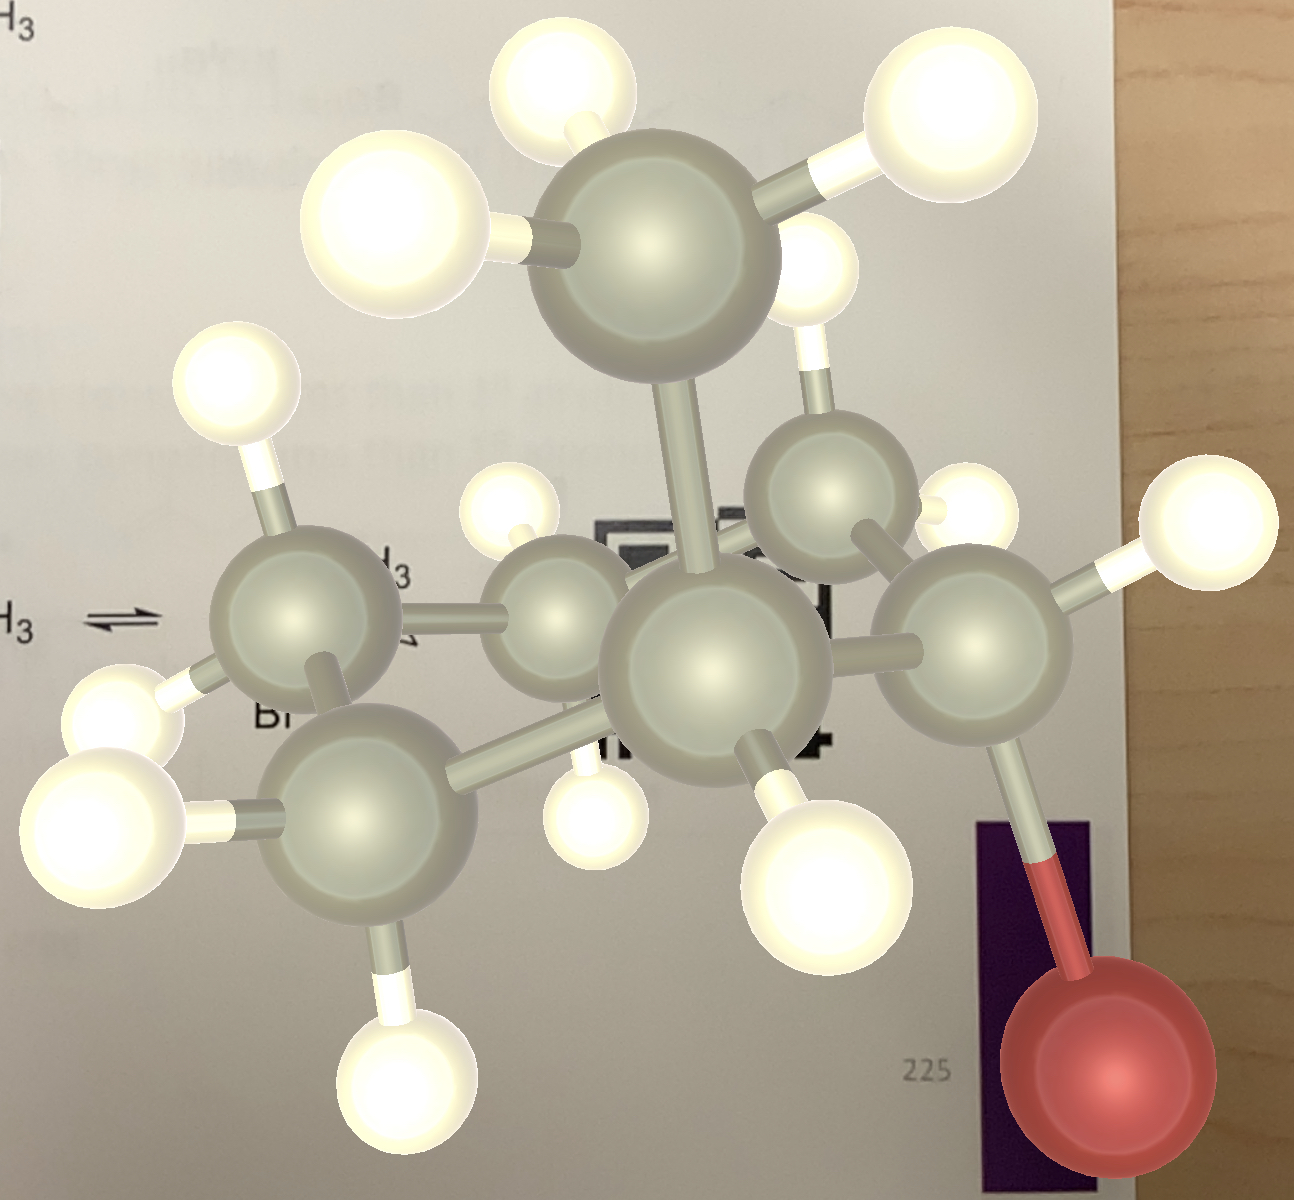 Molecular 3D shapes over a piece of paper with an organic chemistry diagram